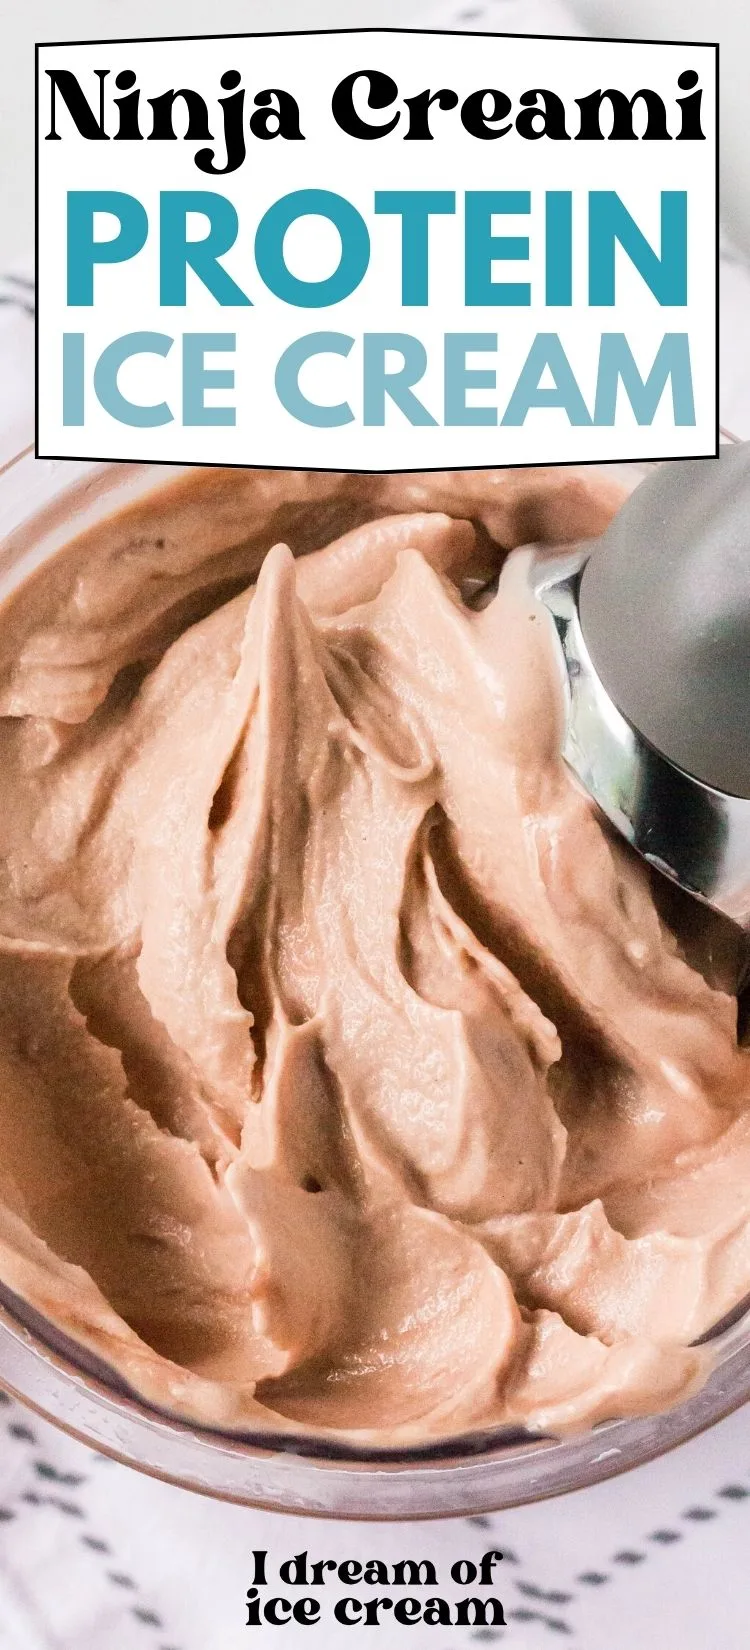 close-up view of the top of a Ninja Creami pint filled with chocolate protein ice cream.